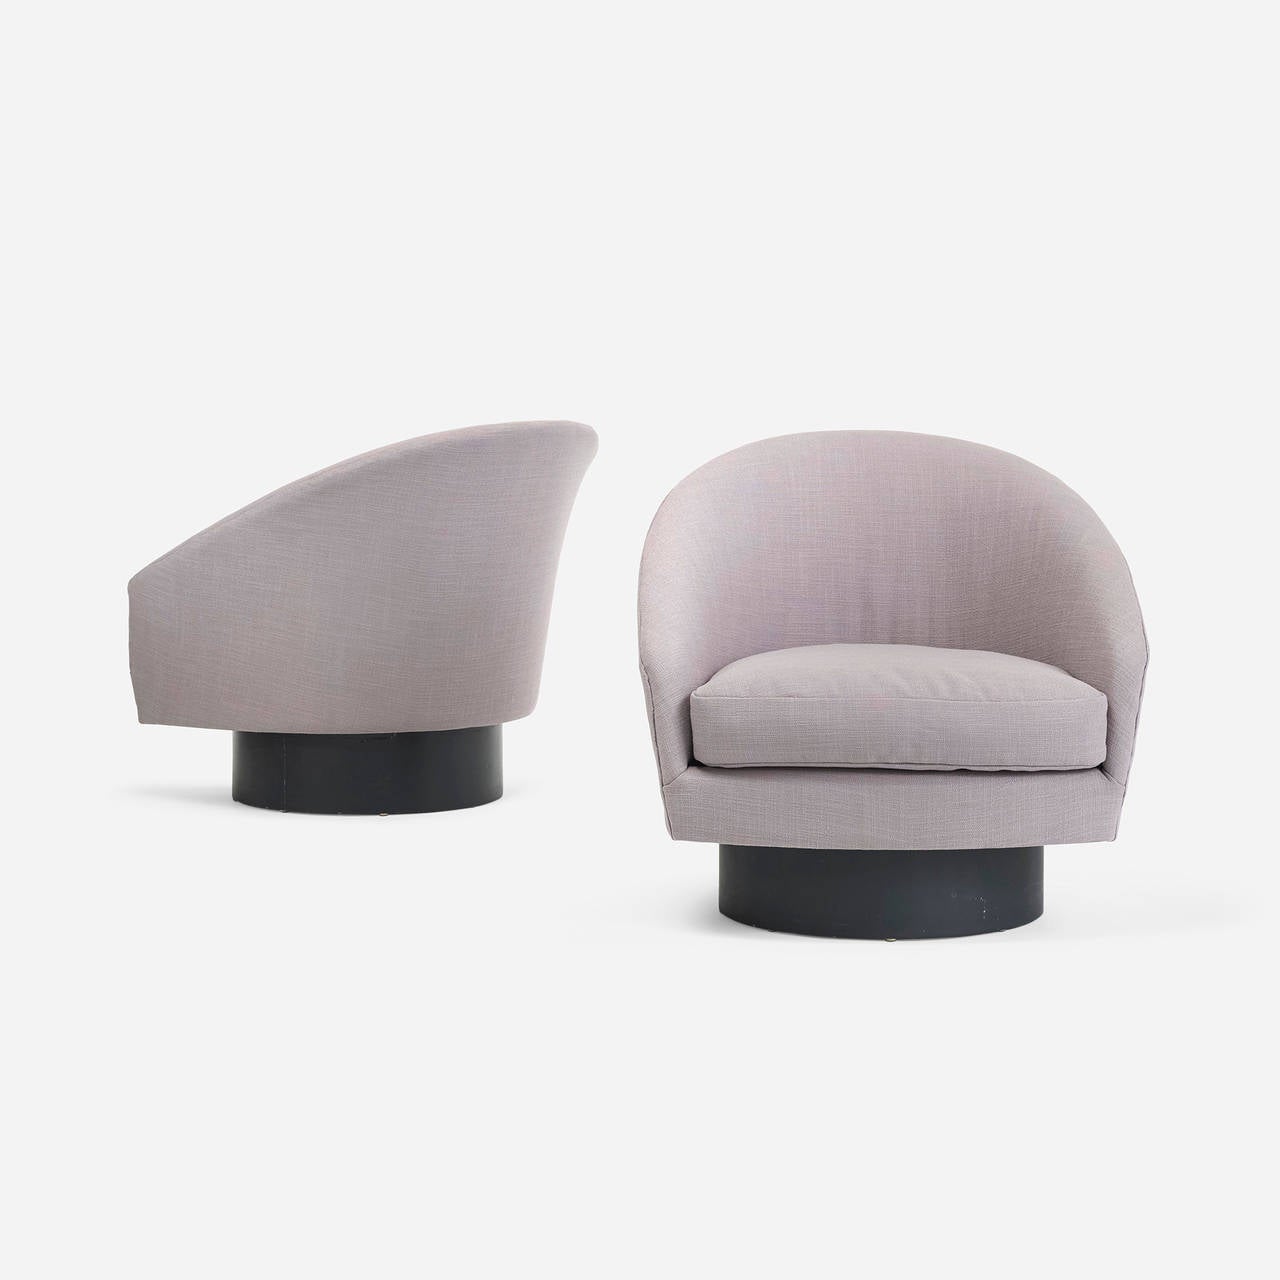 Lacquered Swivel Lounge Chairs, Pair by Adrian Pearsall for Craft Associates